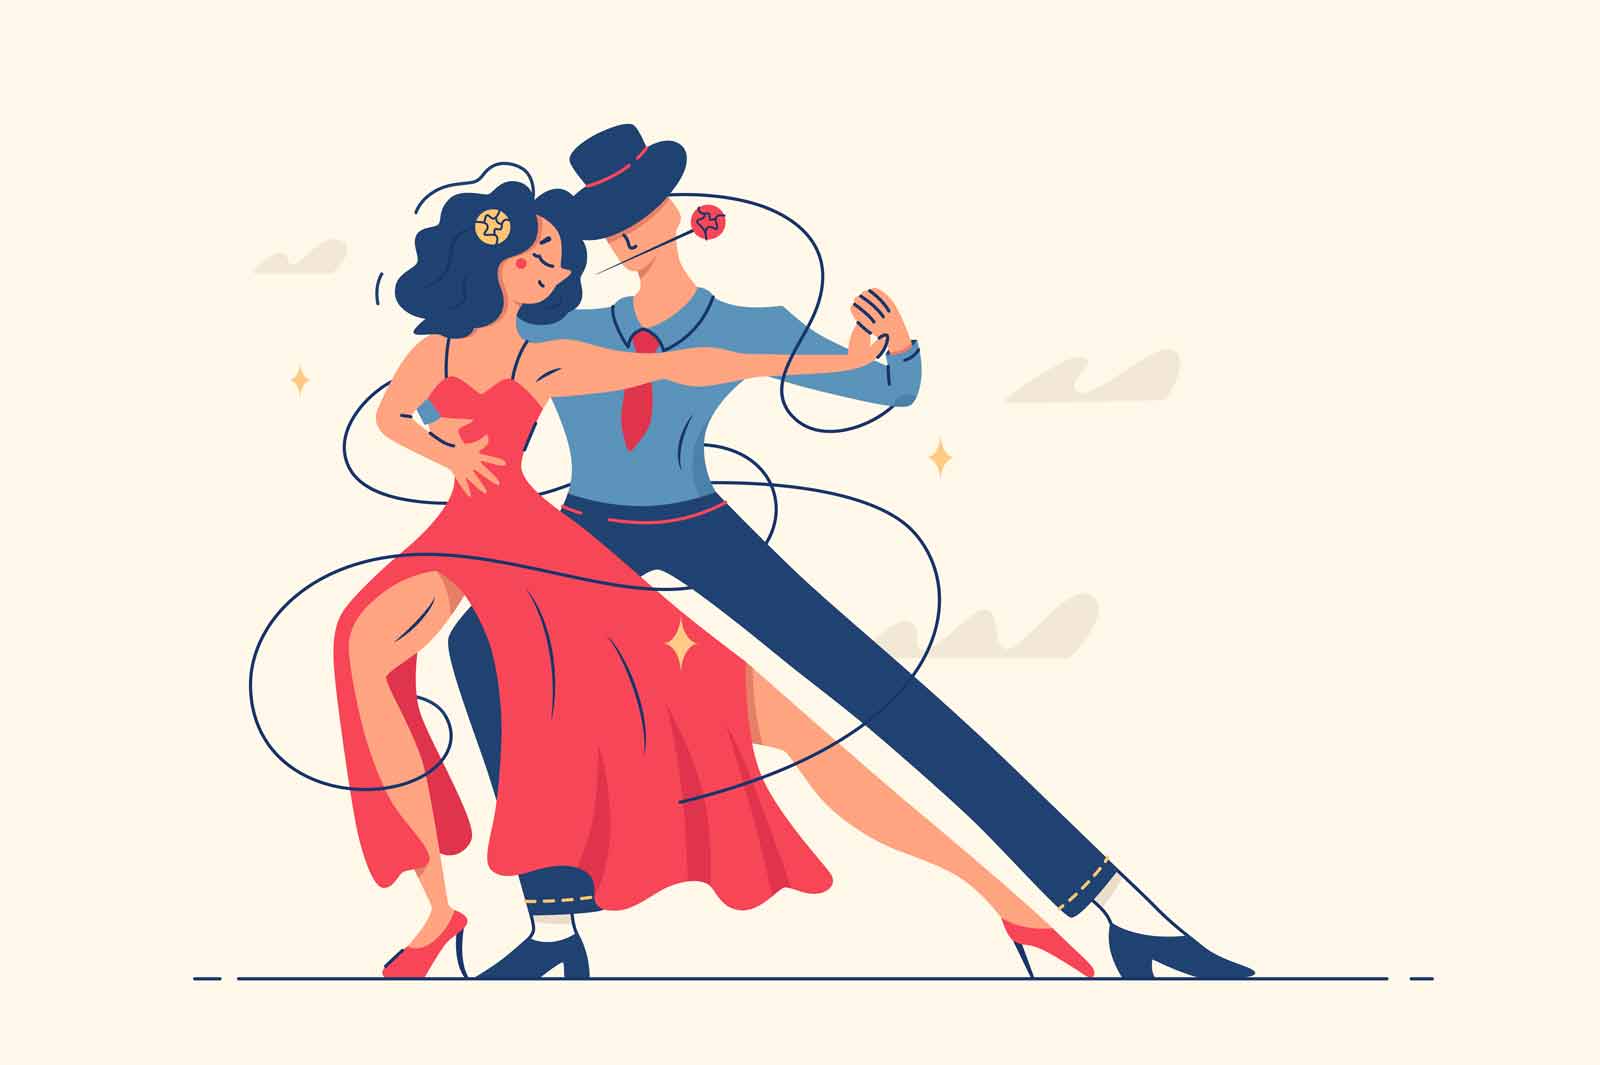 Man and woman dancing tango vector illustration. Female in red dress and man in suit with rose in teeth flat style. Dance class, art, leisure, tango concept. Isolated on beige background